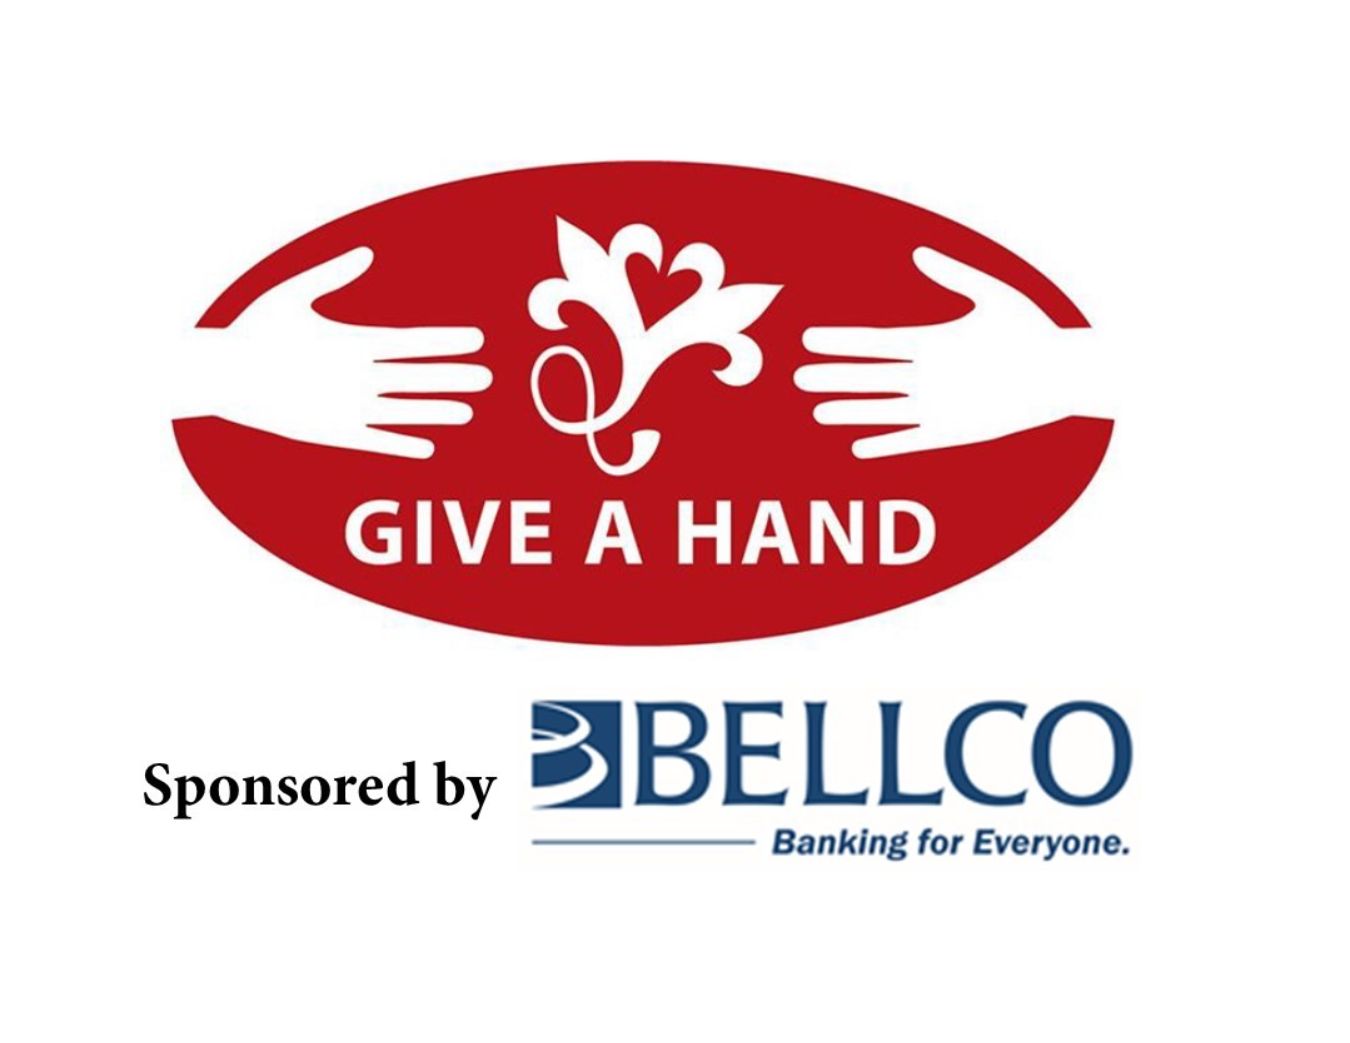 Bellco- Give a Hand - Make a Difference